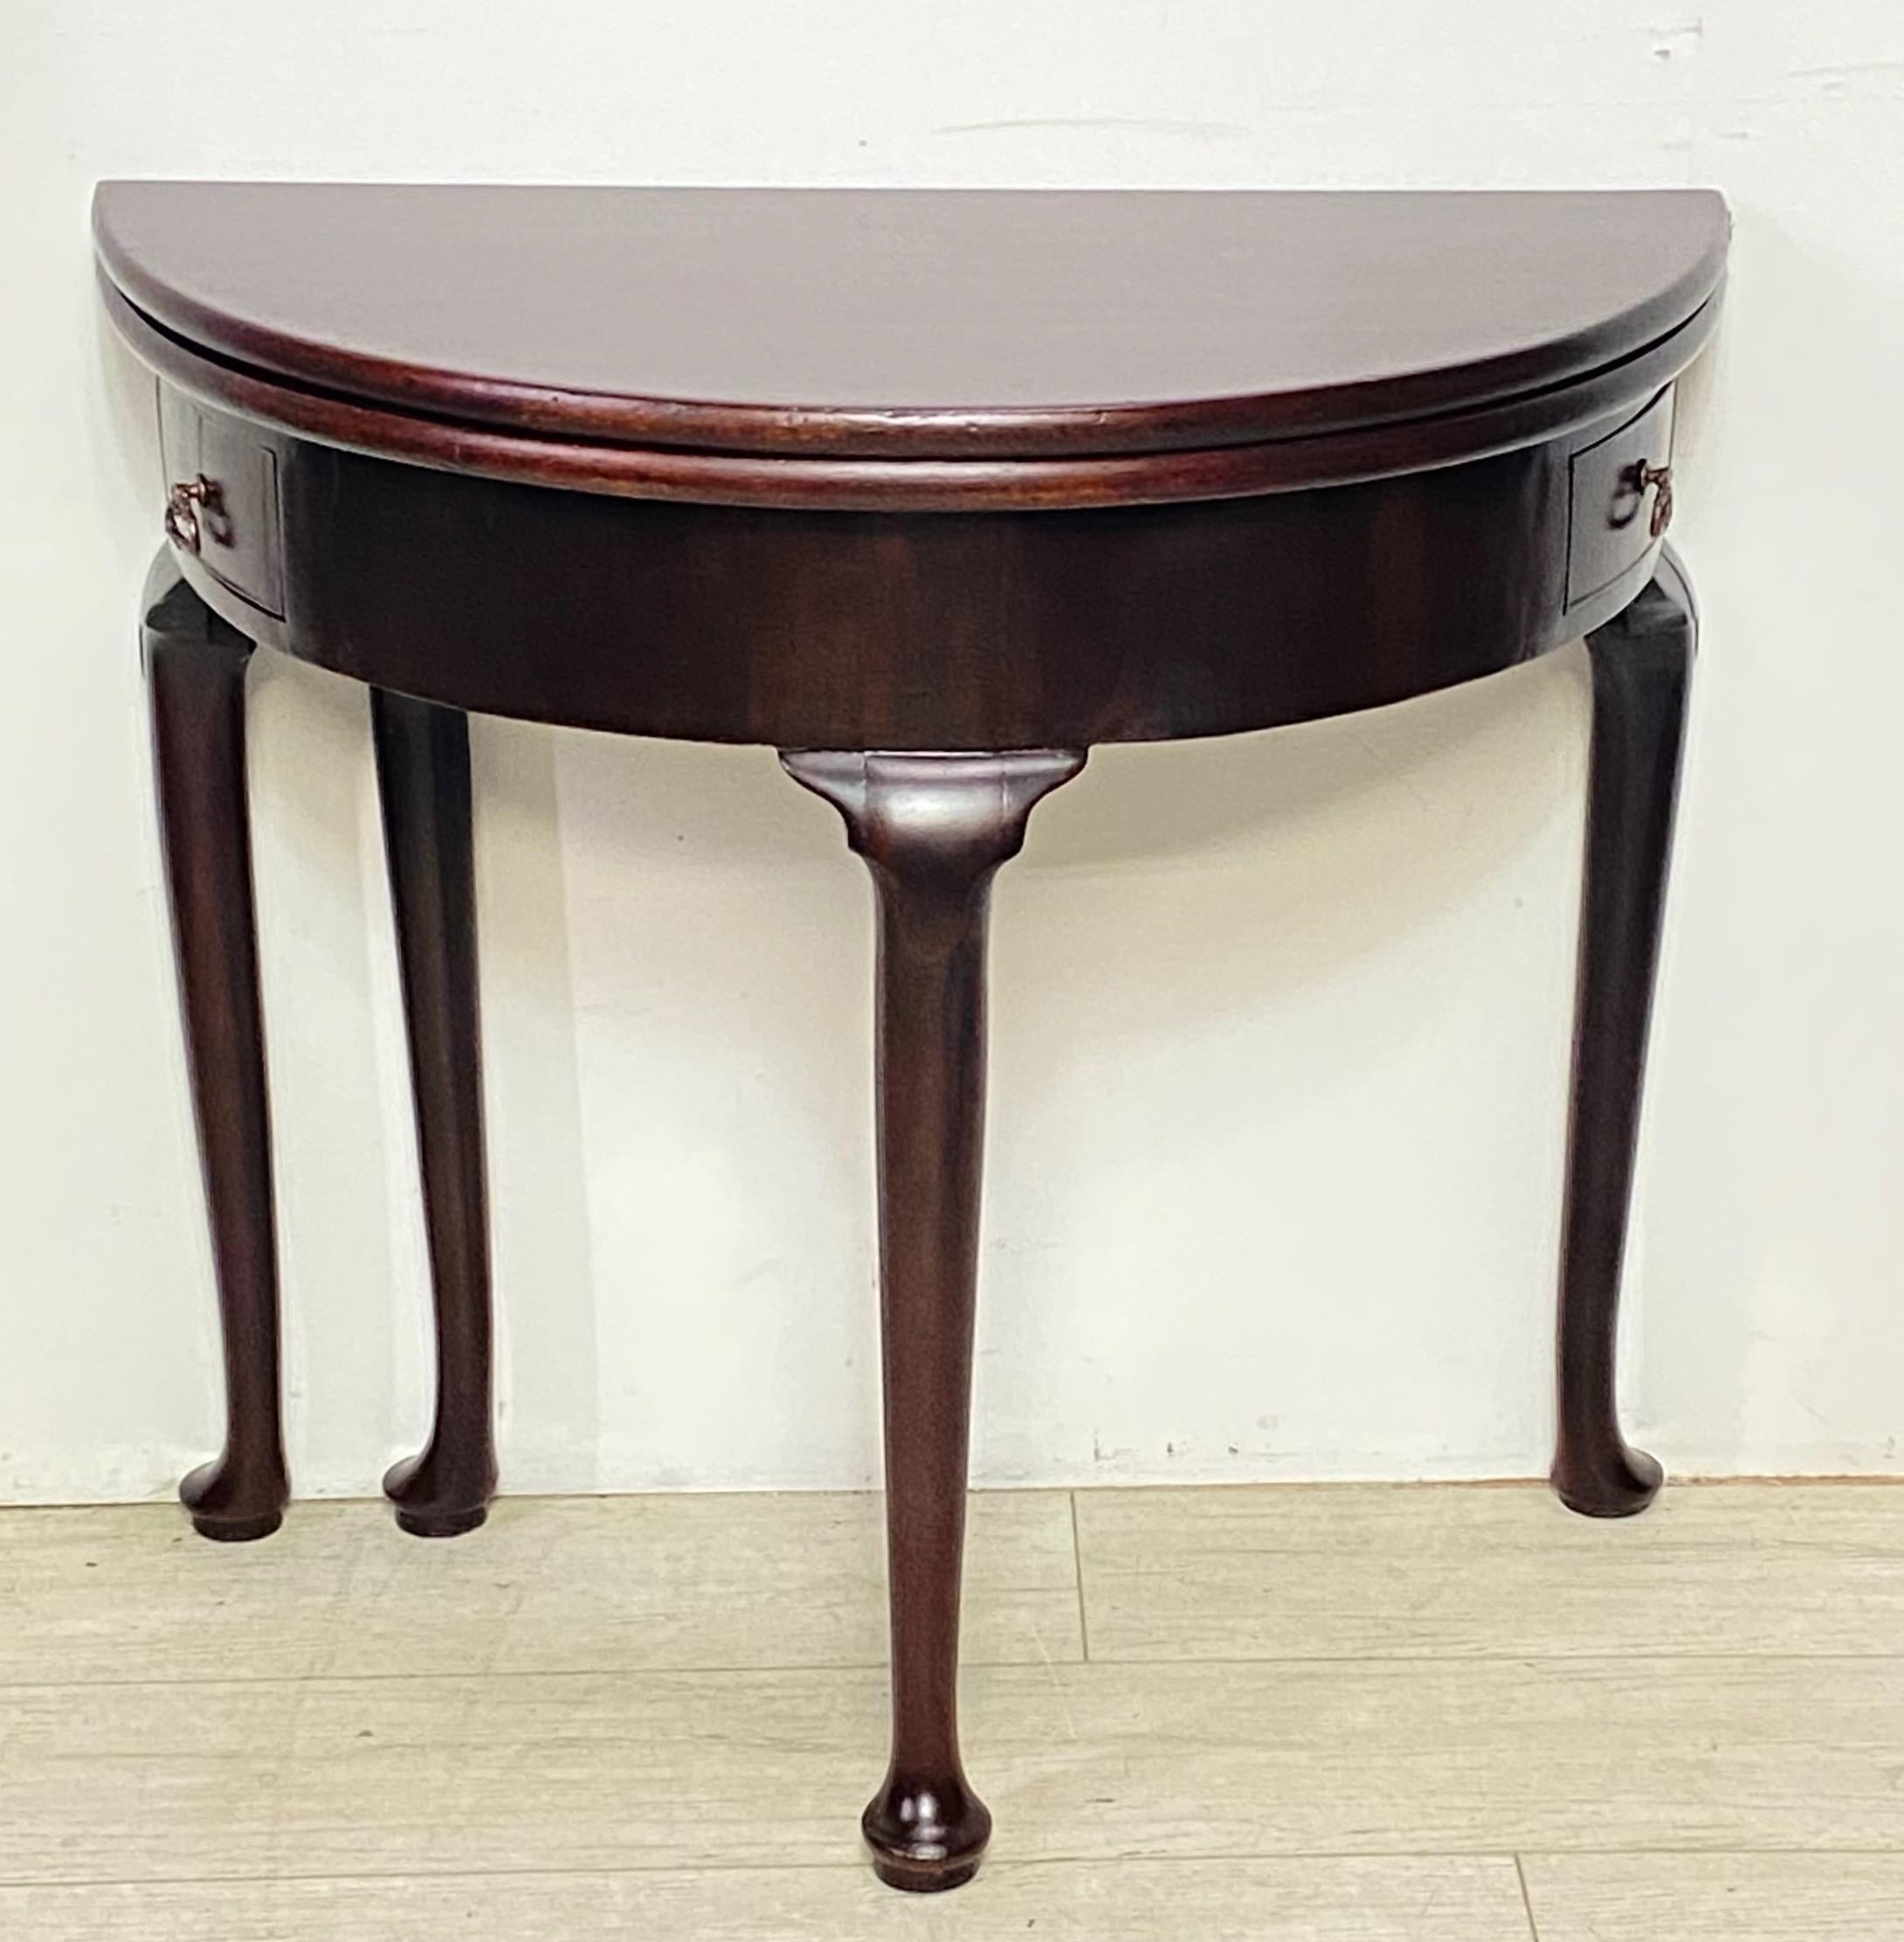 An 18th century Georgian period Demi Lune mahogany game / tea table with two small drawers. The top folds over and opens to a round table top supported on a swing out leg.
England, 1770-1780.
Recently refinished, the drawer pulls have been